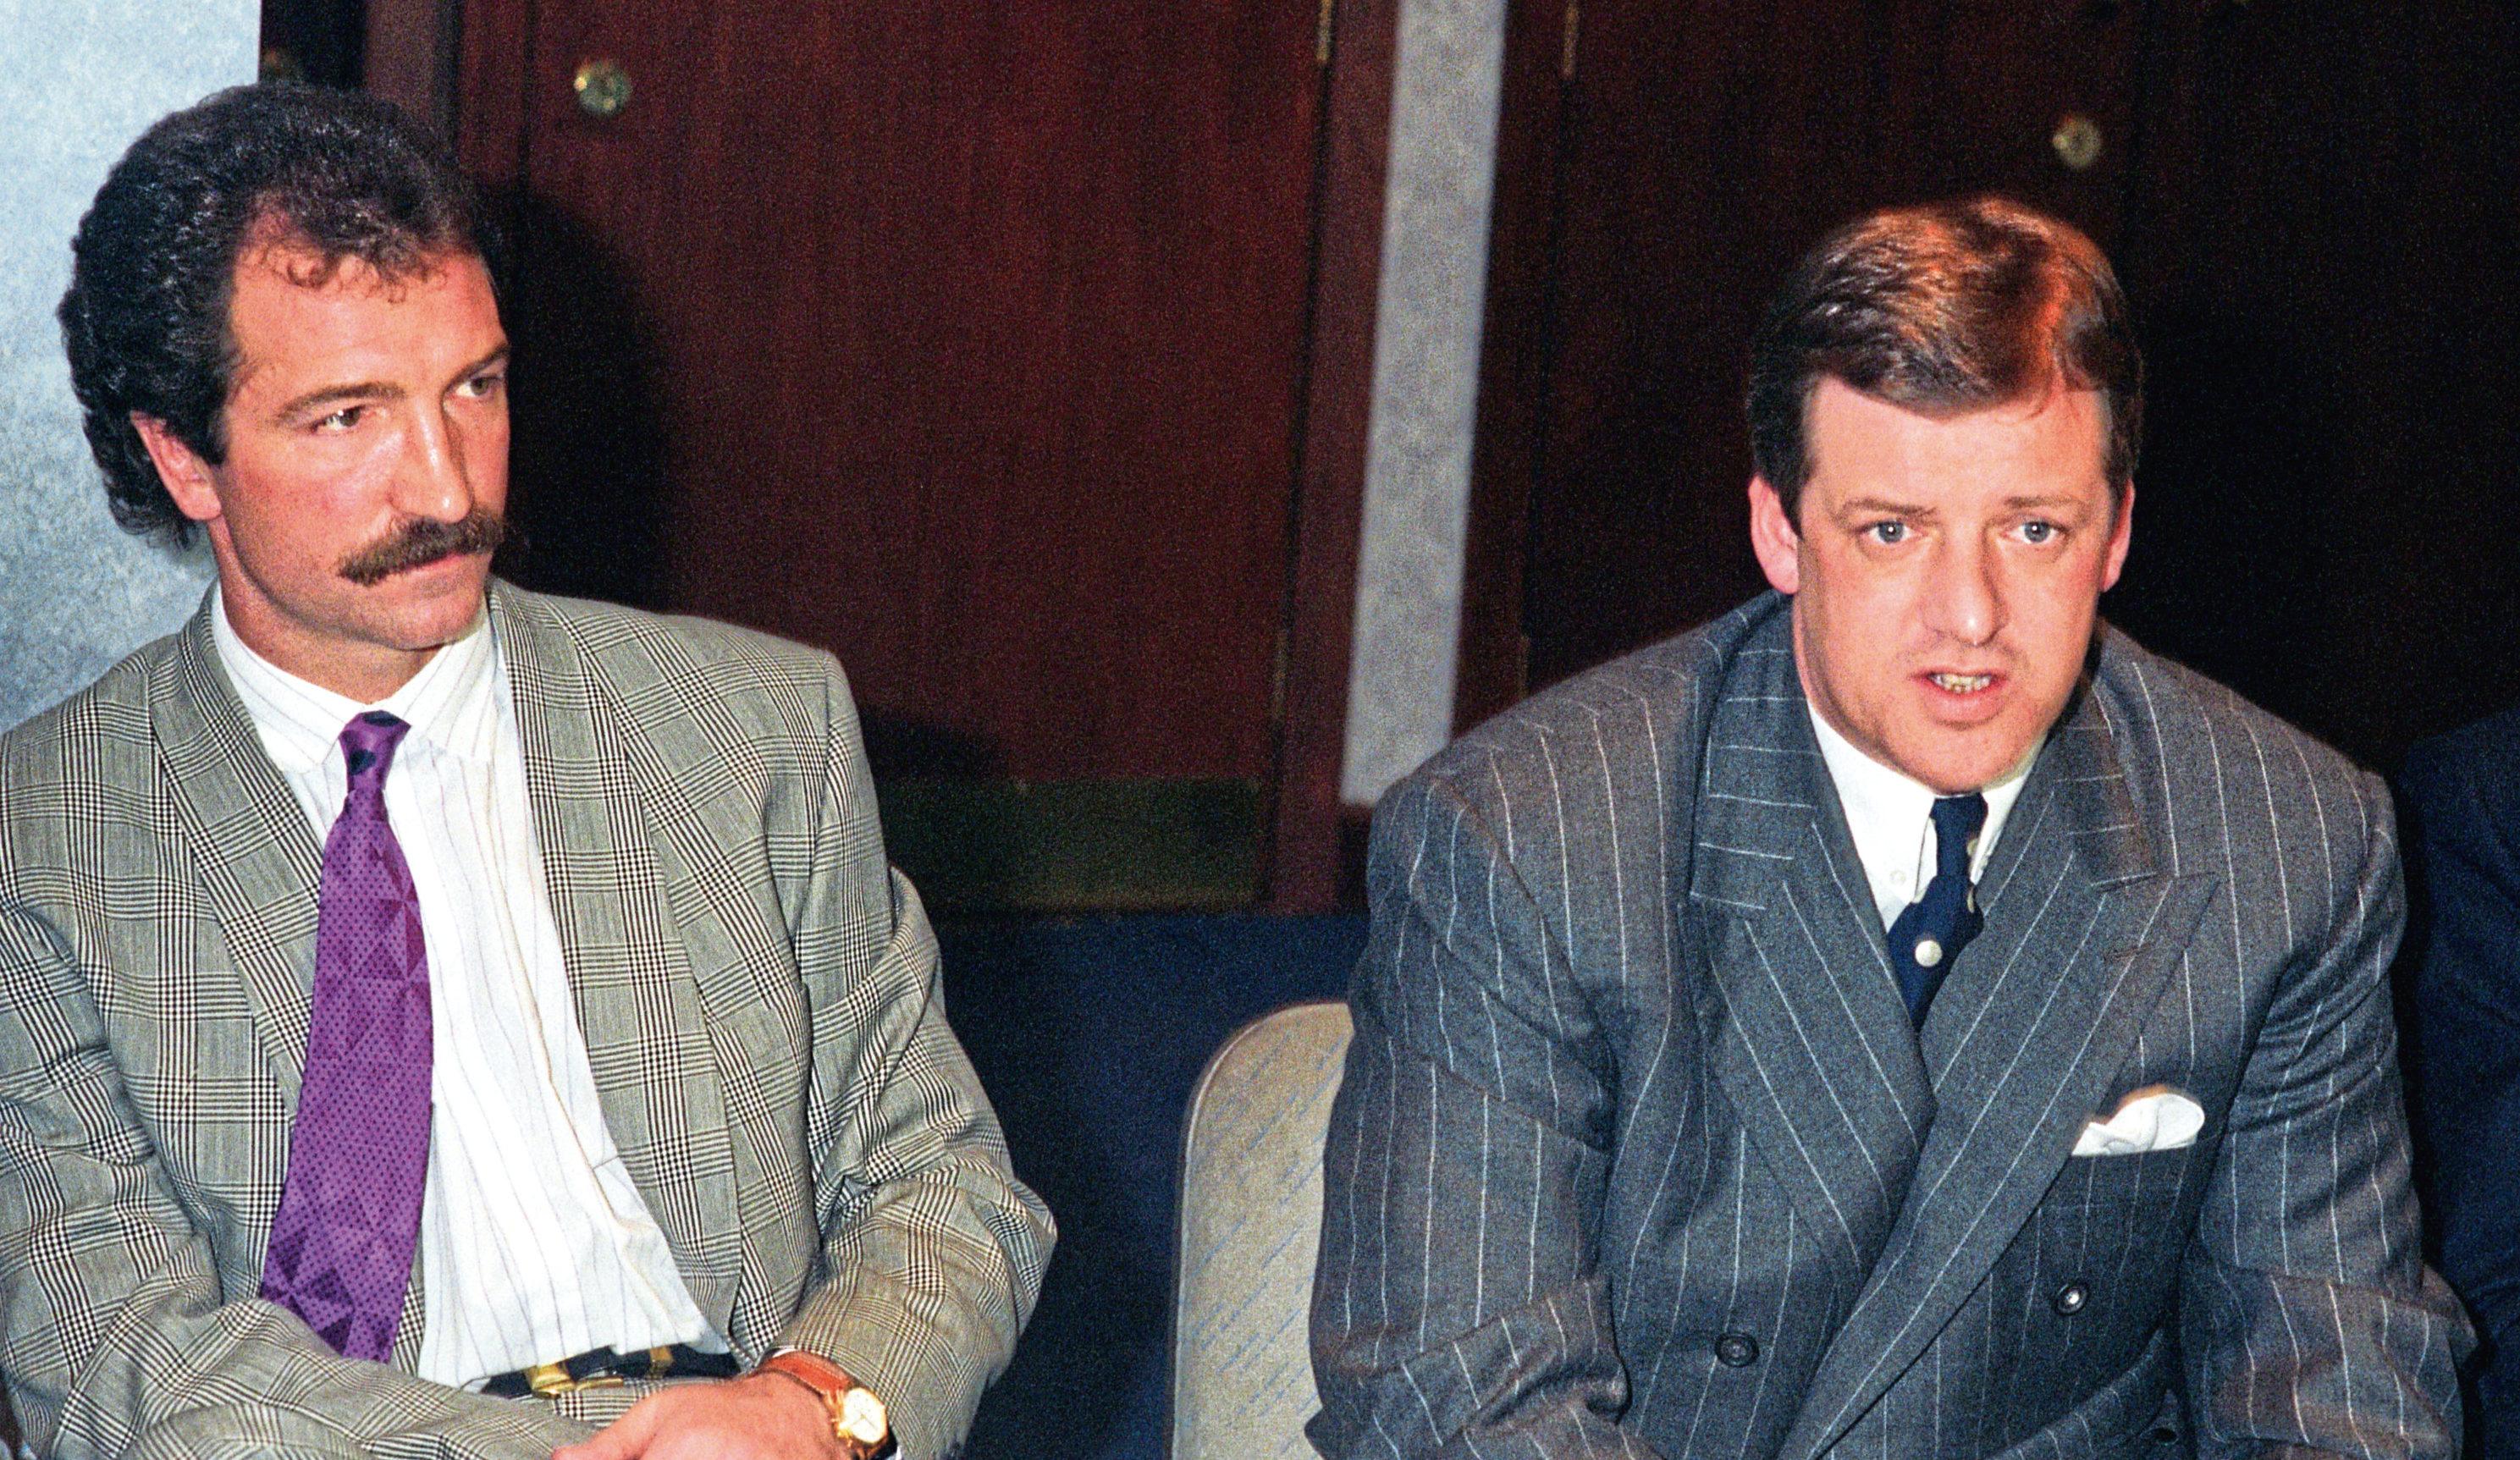 Rangers chairman David Murray (right) gives details of Graeme Souness' departure from the club in 1990